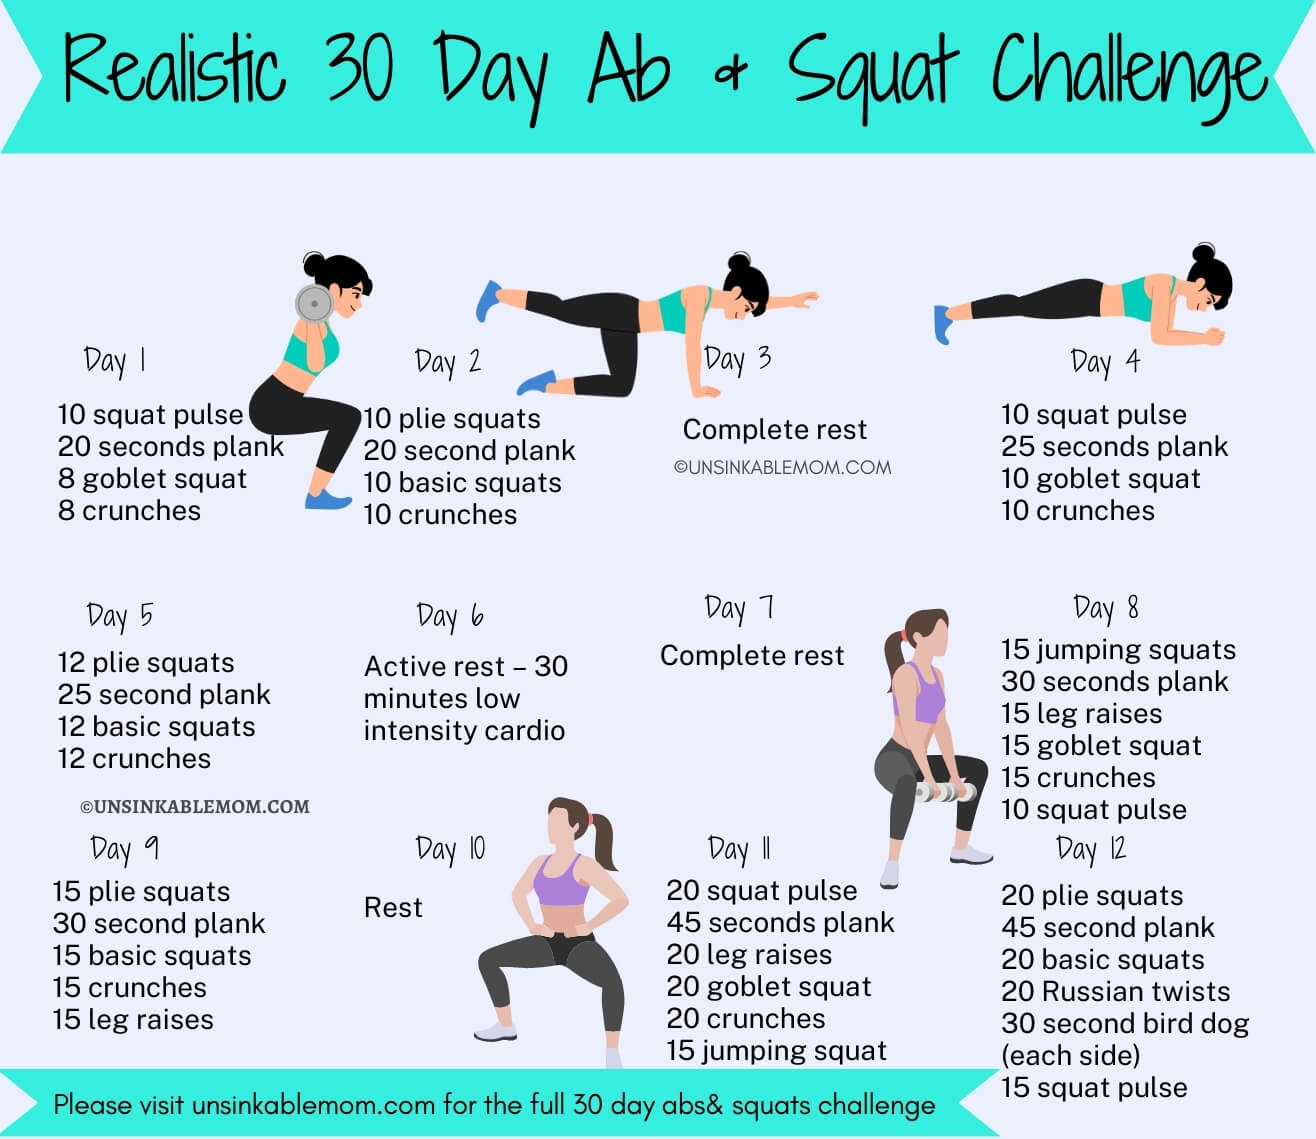 30 Day Ab and Squat Challenge